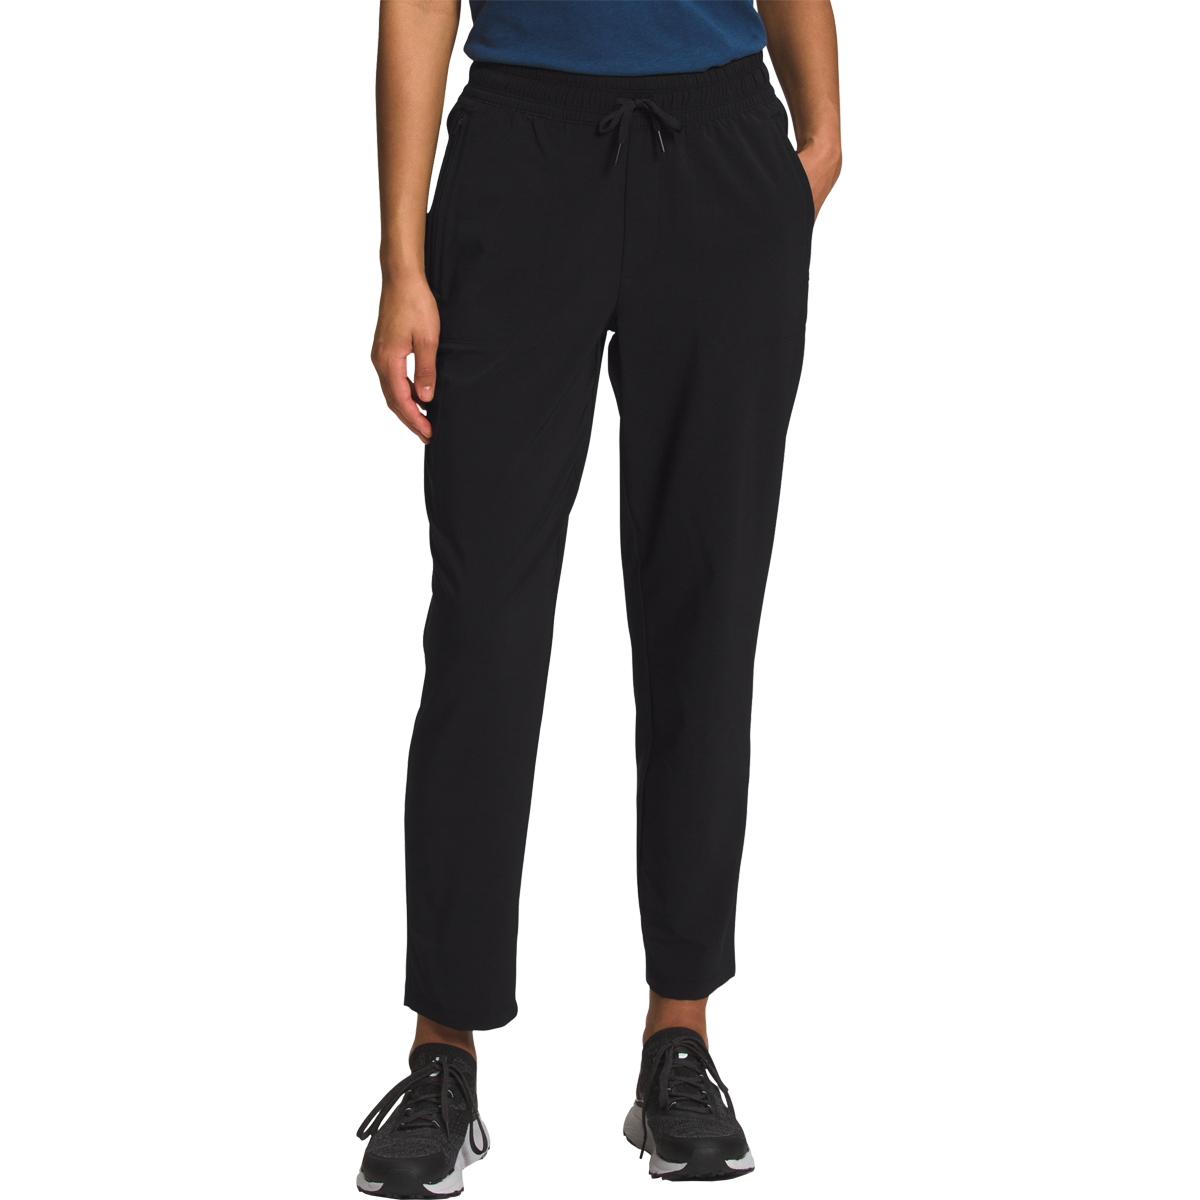 Women's Never Stop Wearing Pant alternate view